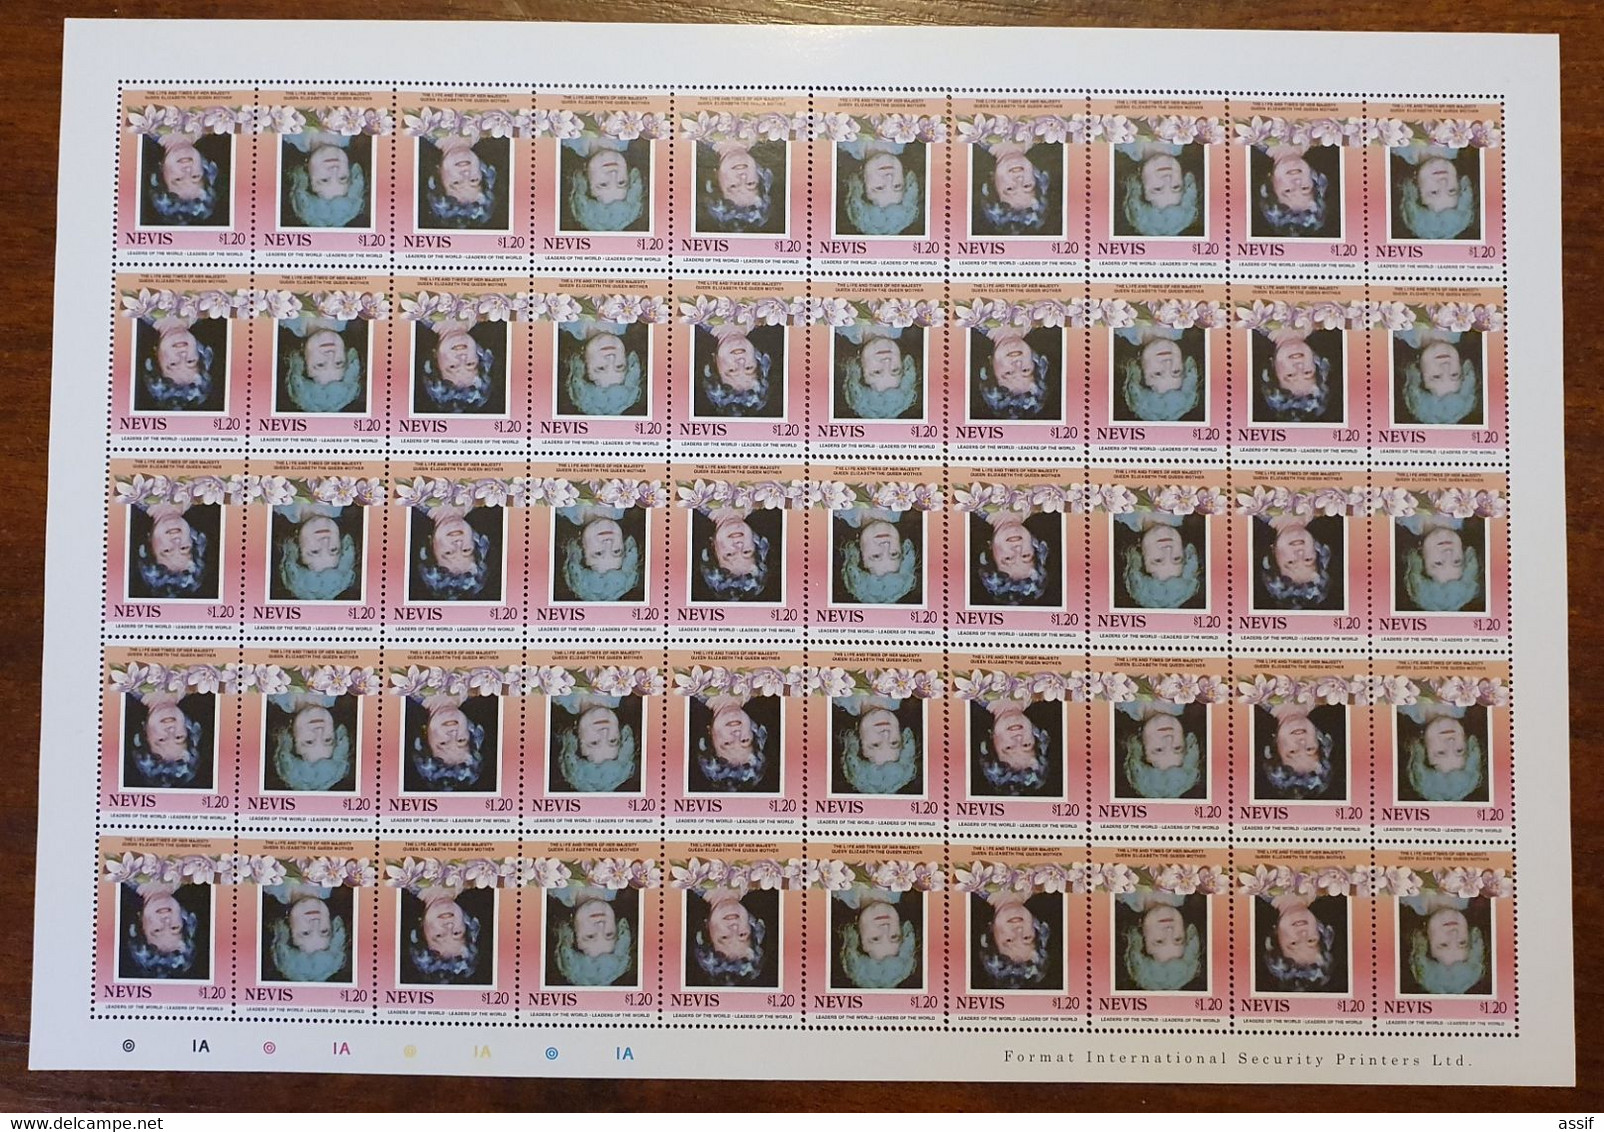 NEVIS 1,20$ 1985 FEUILLE ENTIERE CENTRE RENVERSE SHEET INVERTED YT 315 Et 316 50 TIMBRES NEUFS ** /FREE SHIPPING R - St.Kitts And Nevis ( 1983-...)